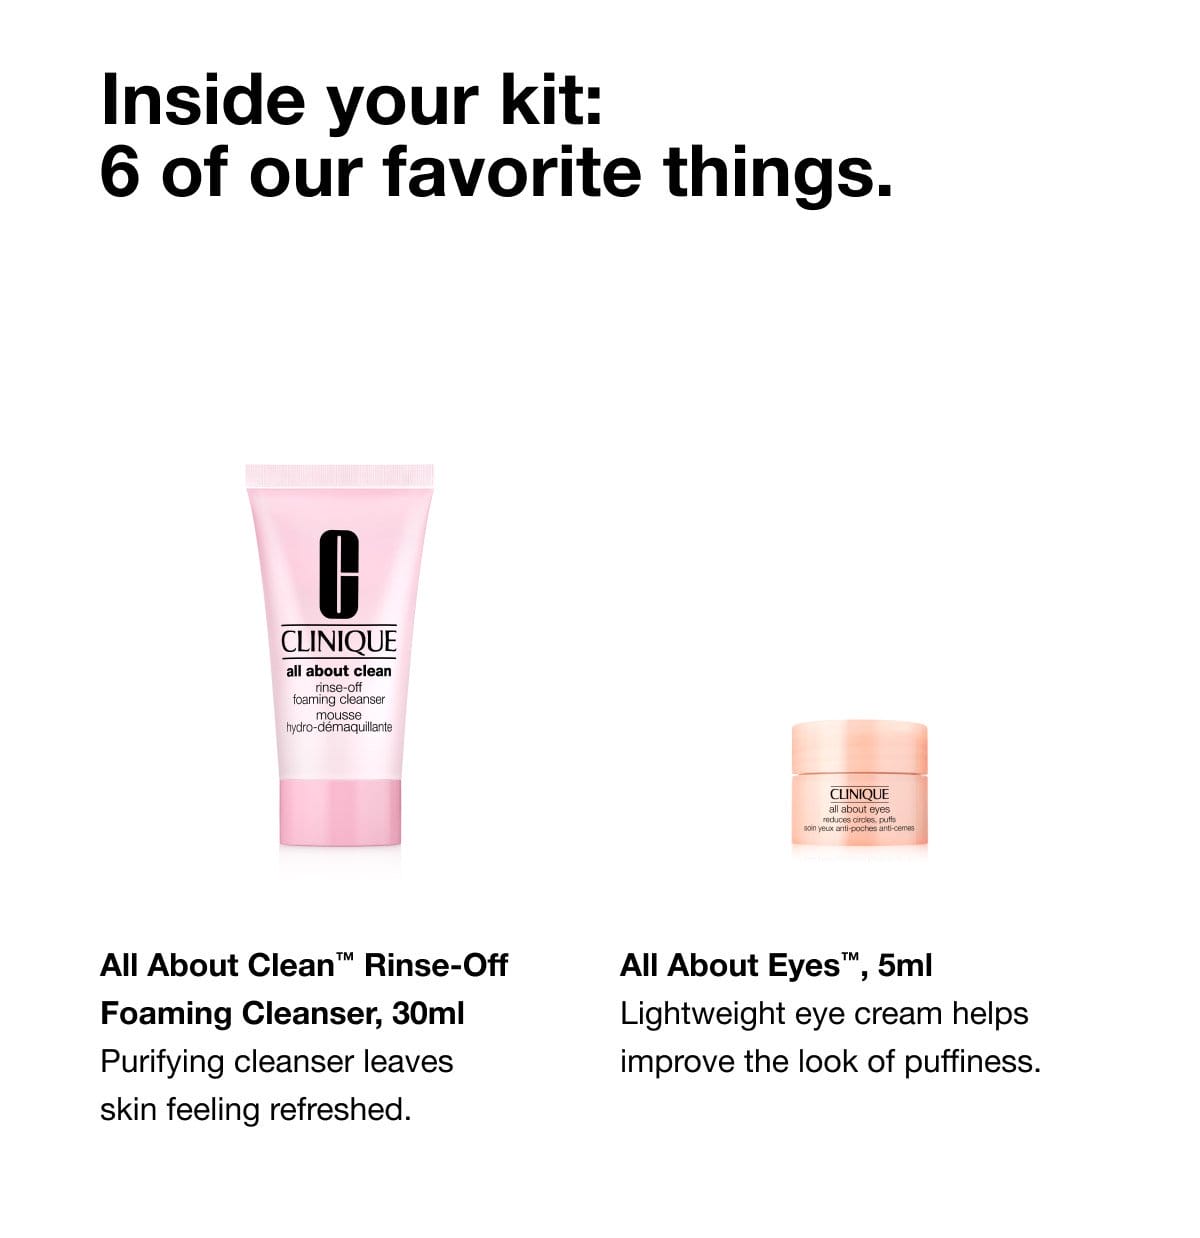 Inside your kit: 6 of our favorite things. All About Clean™ Rinse-Off Foaming Cleanser, 30ml Purifying cleanser leaves skin feeling refreshed. | All About Eyes™, 5ml Lightweight eye cream helps improve the look of puffiness.